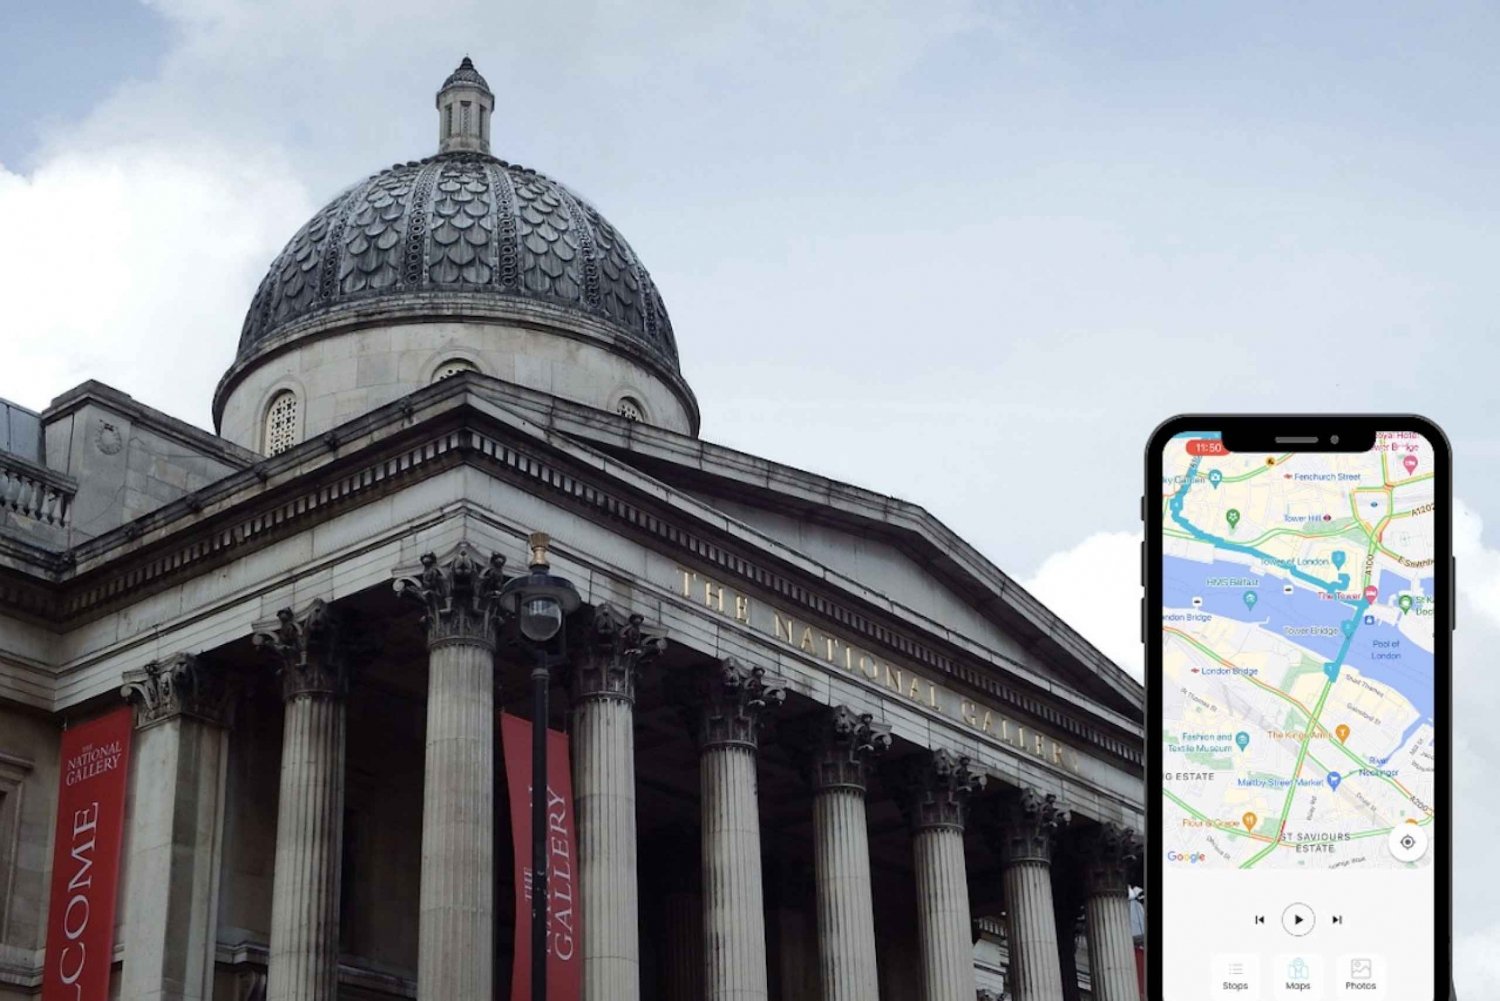 London: National Gallery National Gallery Express-tur med smartphone-app